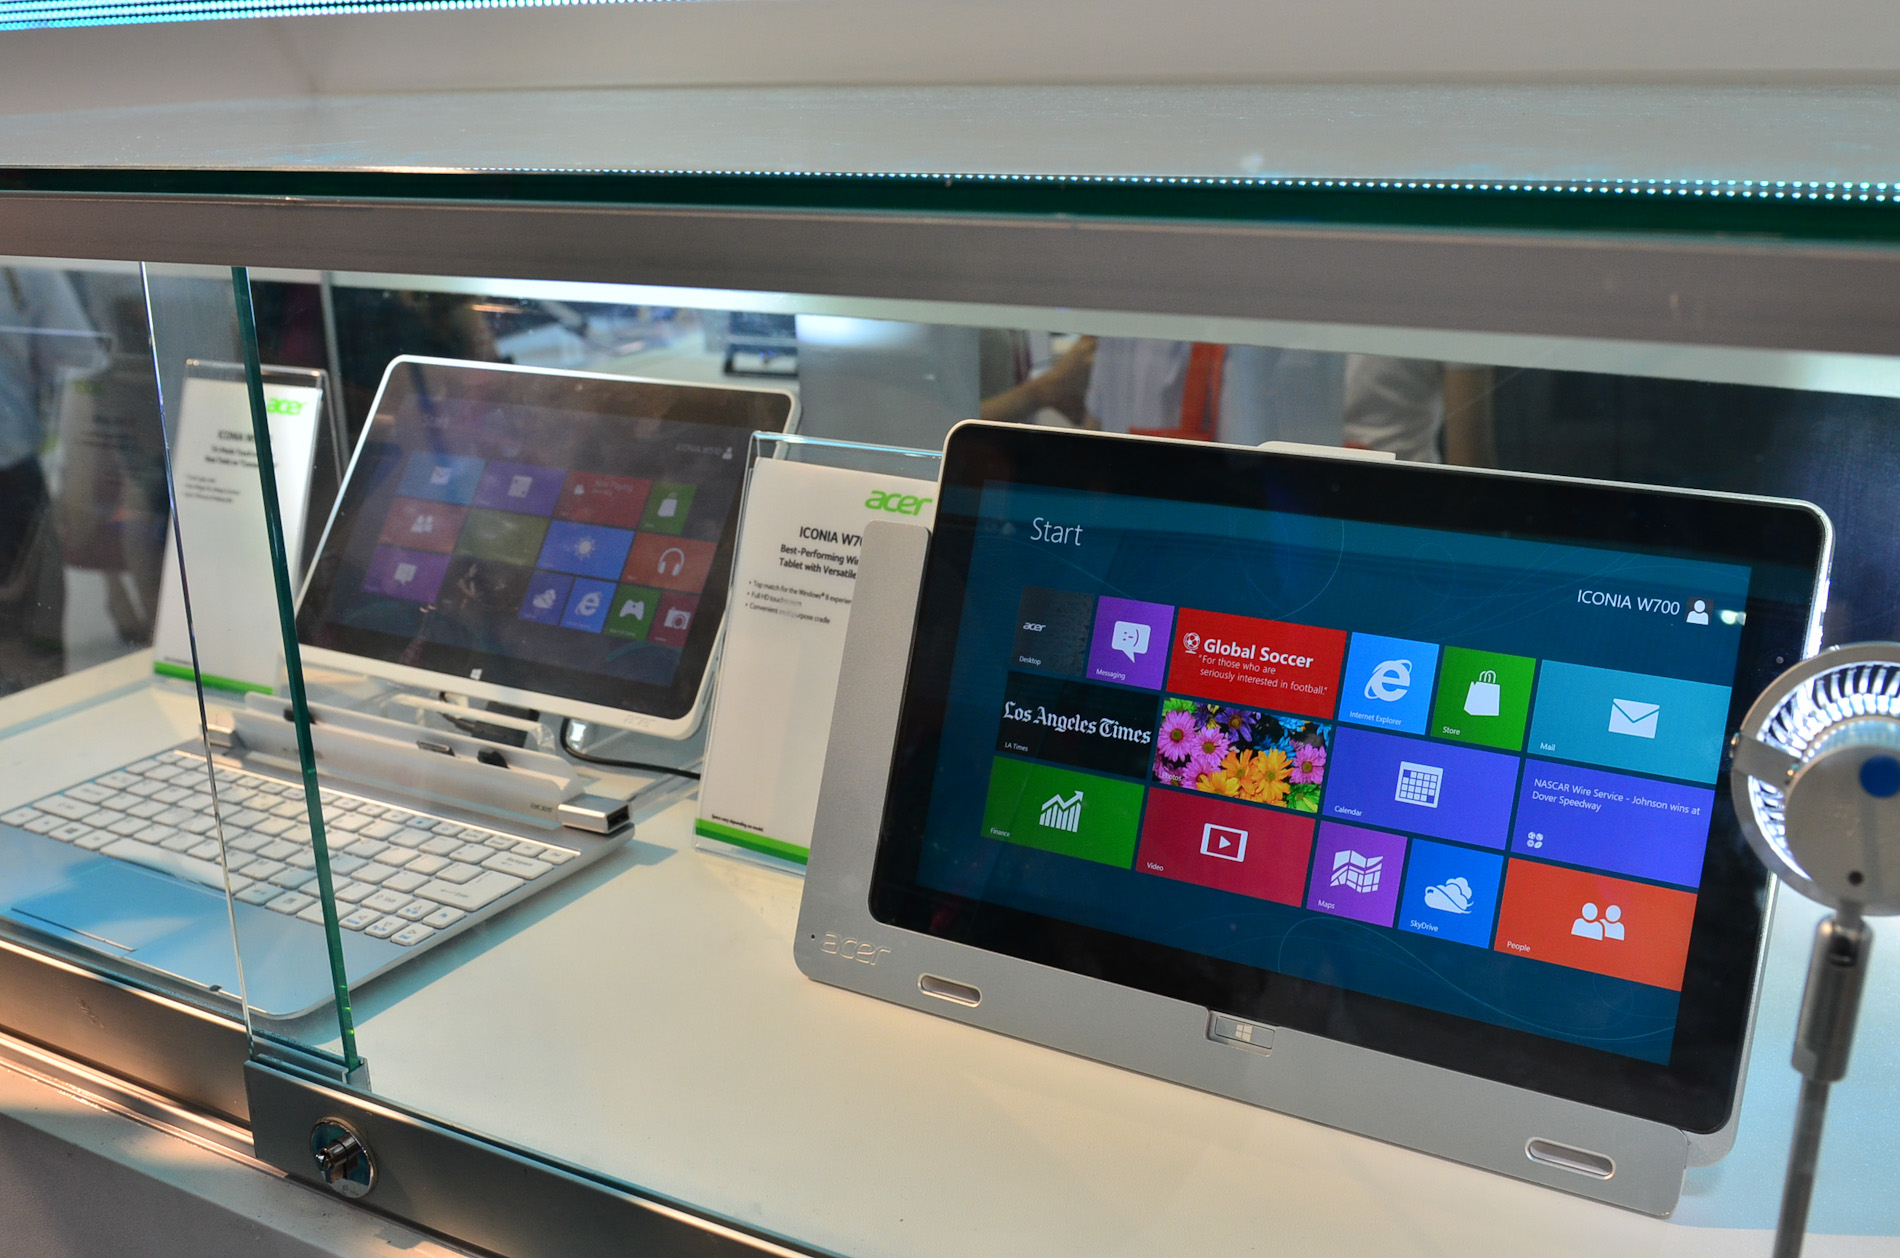 Acer's Iconia W700 Ivy Bridge Windows 8 Tablet: The Start of